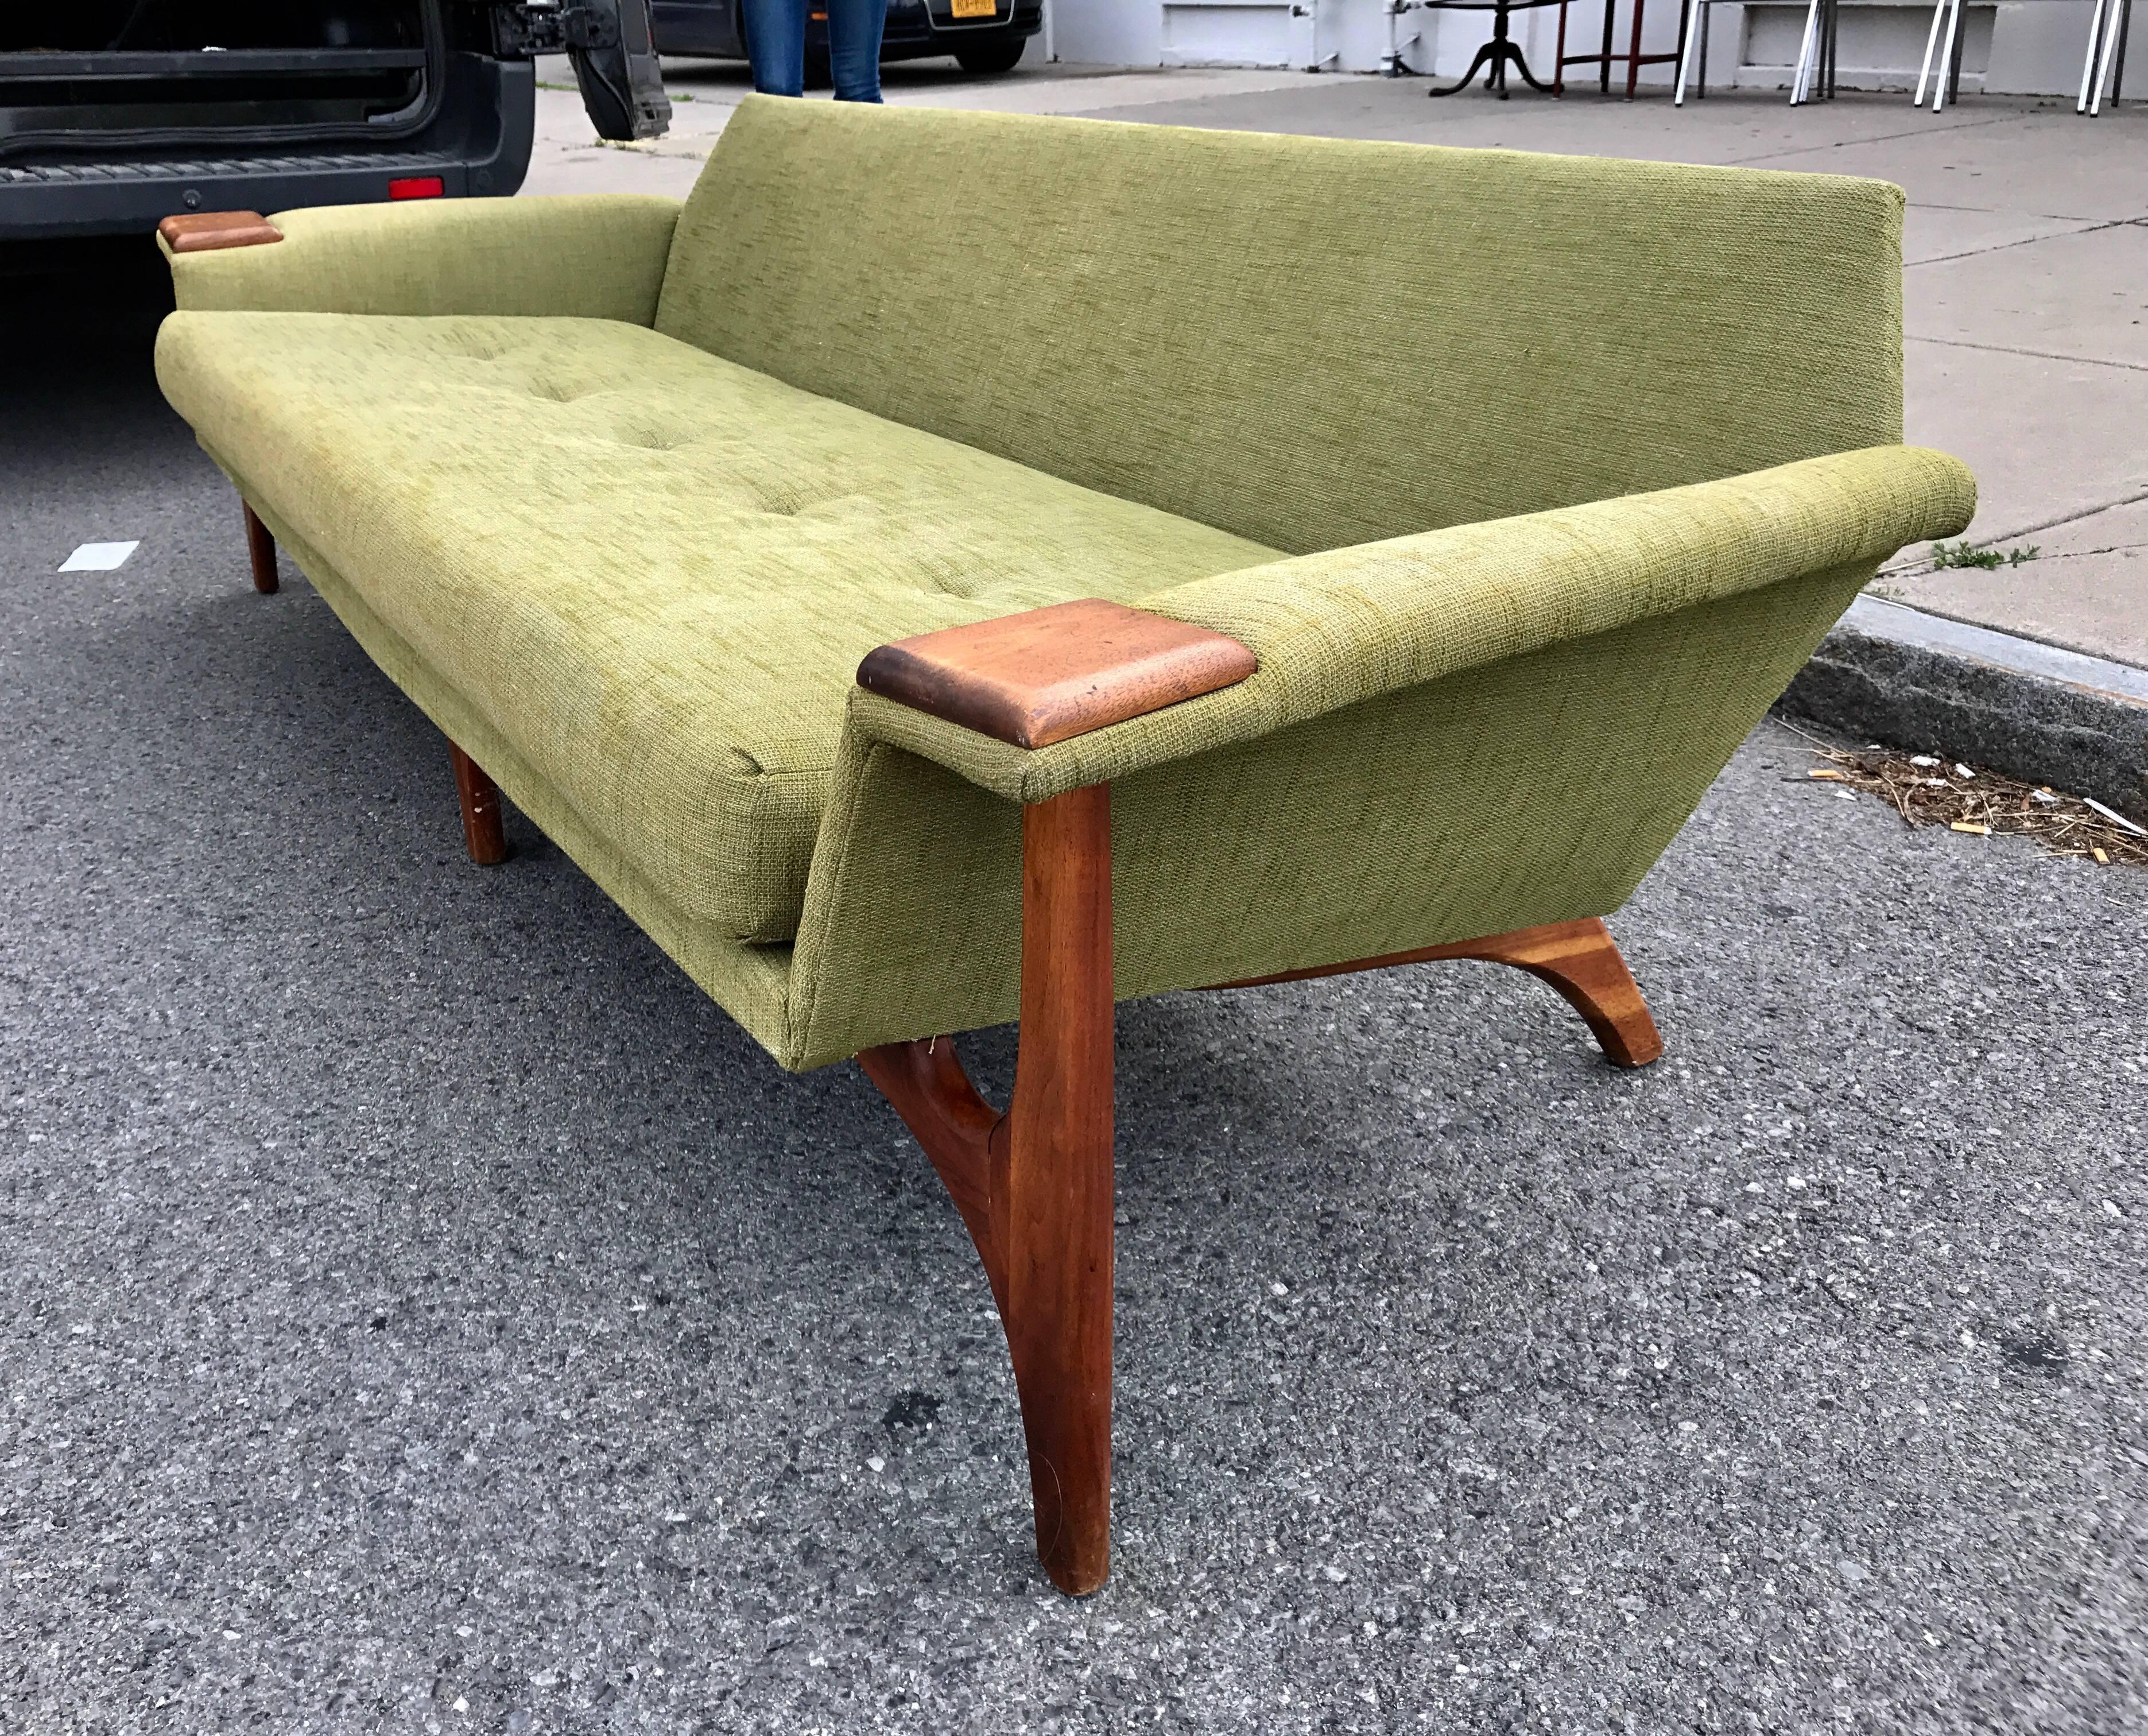 Rare and beautiful full sized sofa designed by Adrian Pearsall for his company Craft Associates, circa 1960. This highly sculptural piece is comprised of a solid walnut wood frame. Retains original fabric,
adding to the sculptural lines are Classic